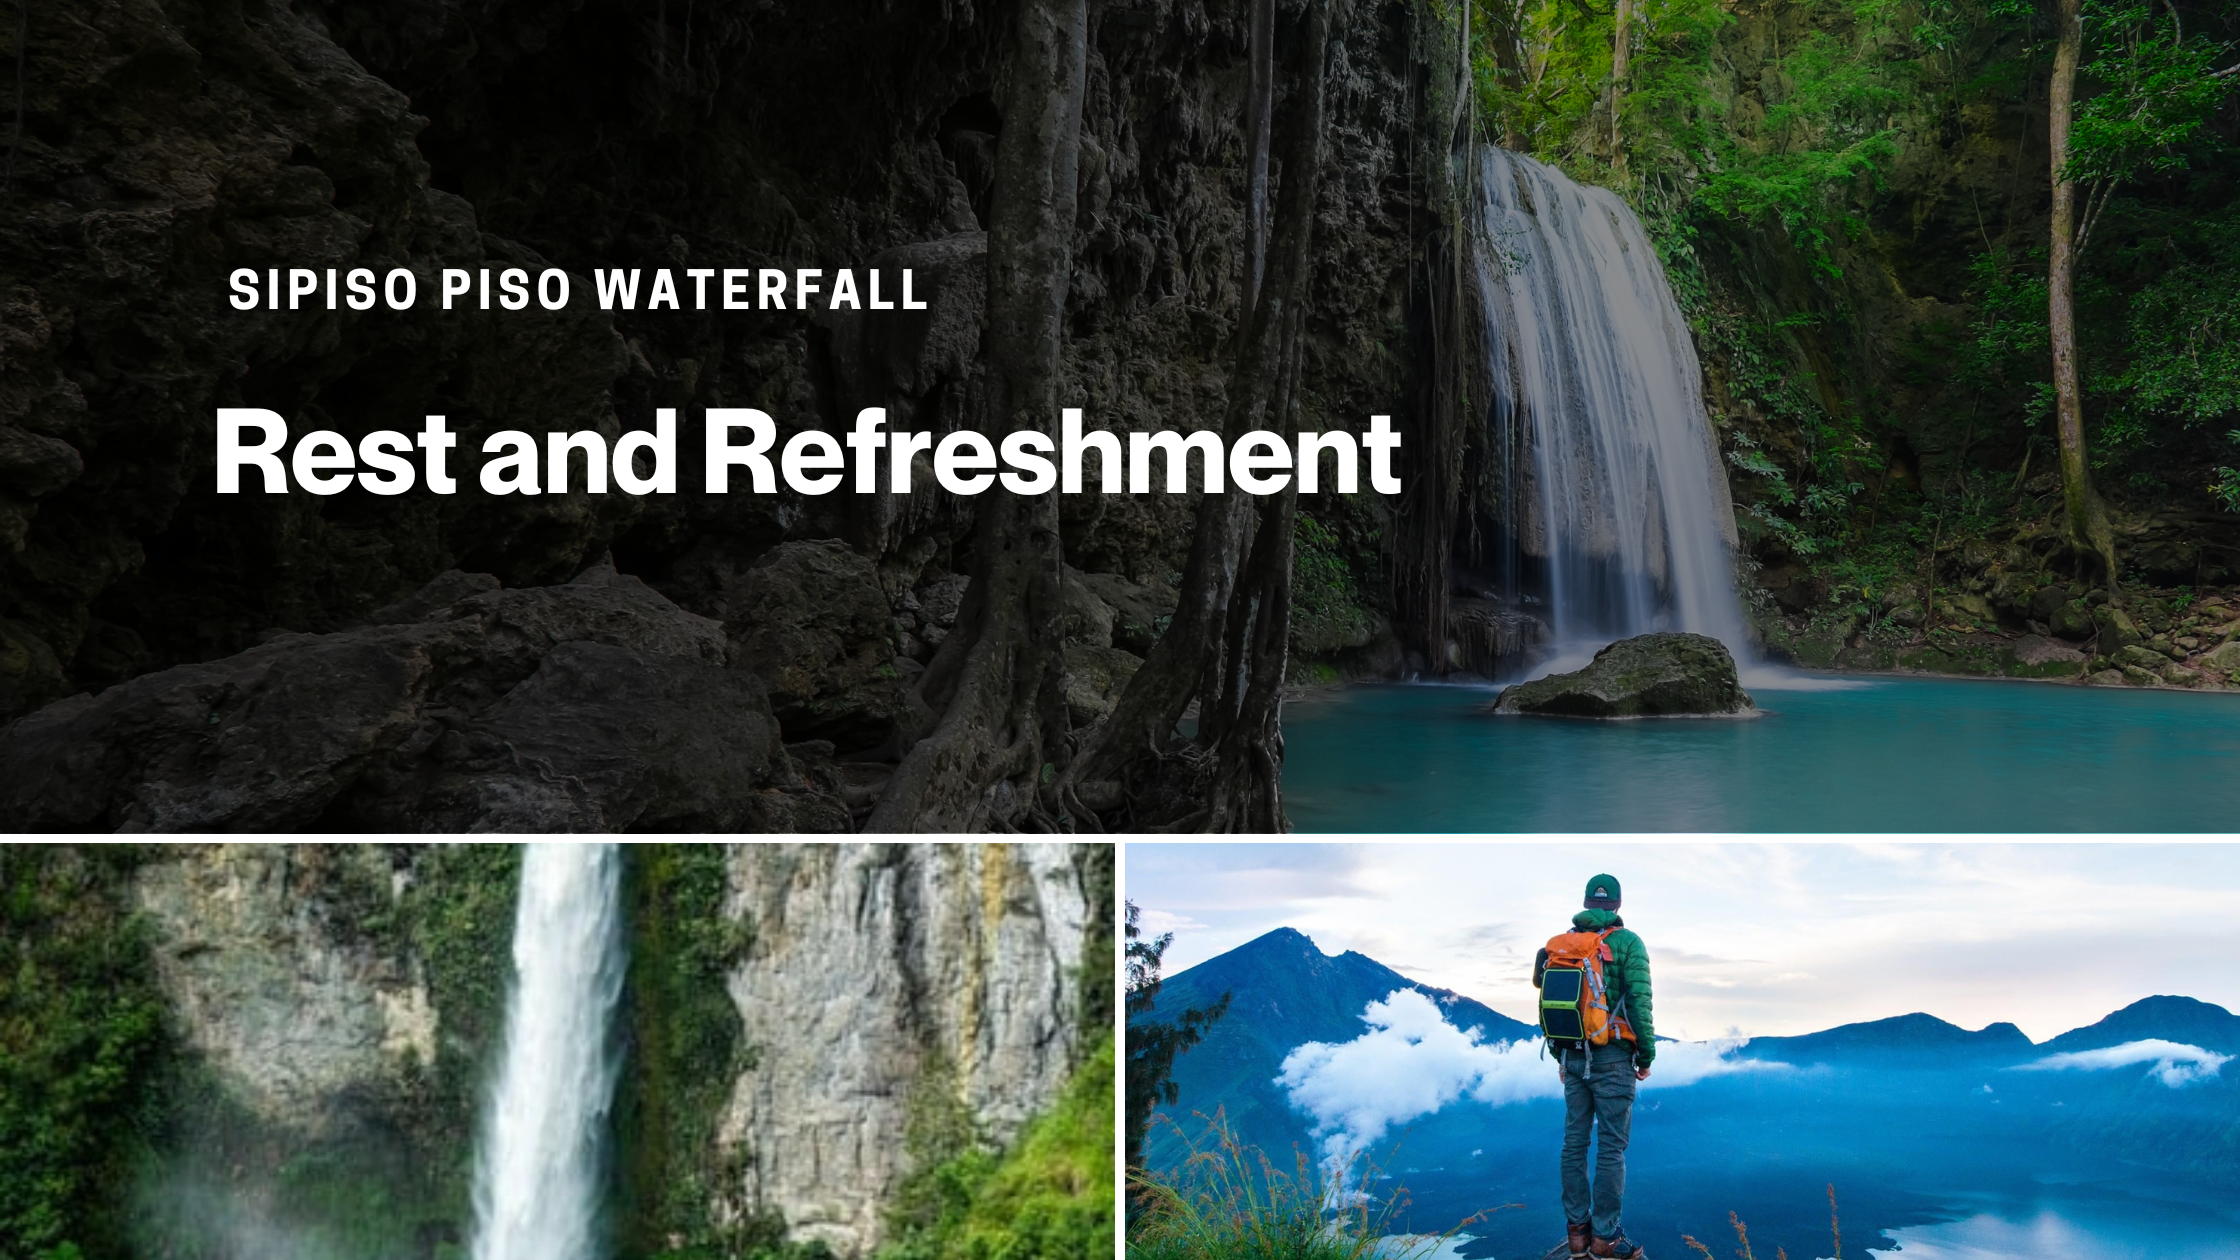 Sipiso Piso Waterfall Rest and Refreshment